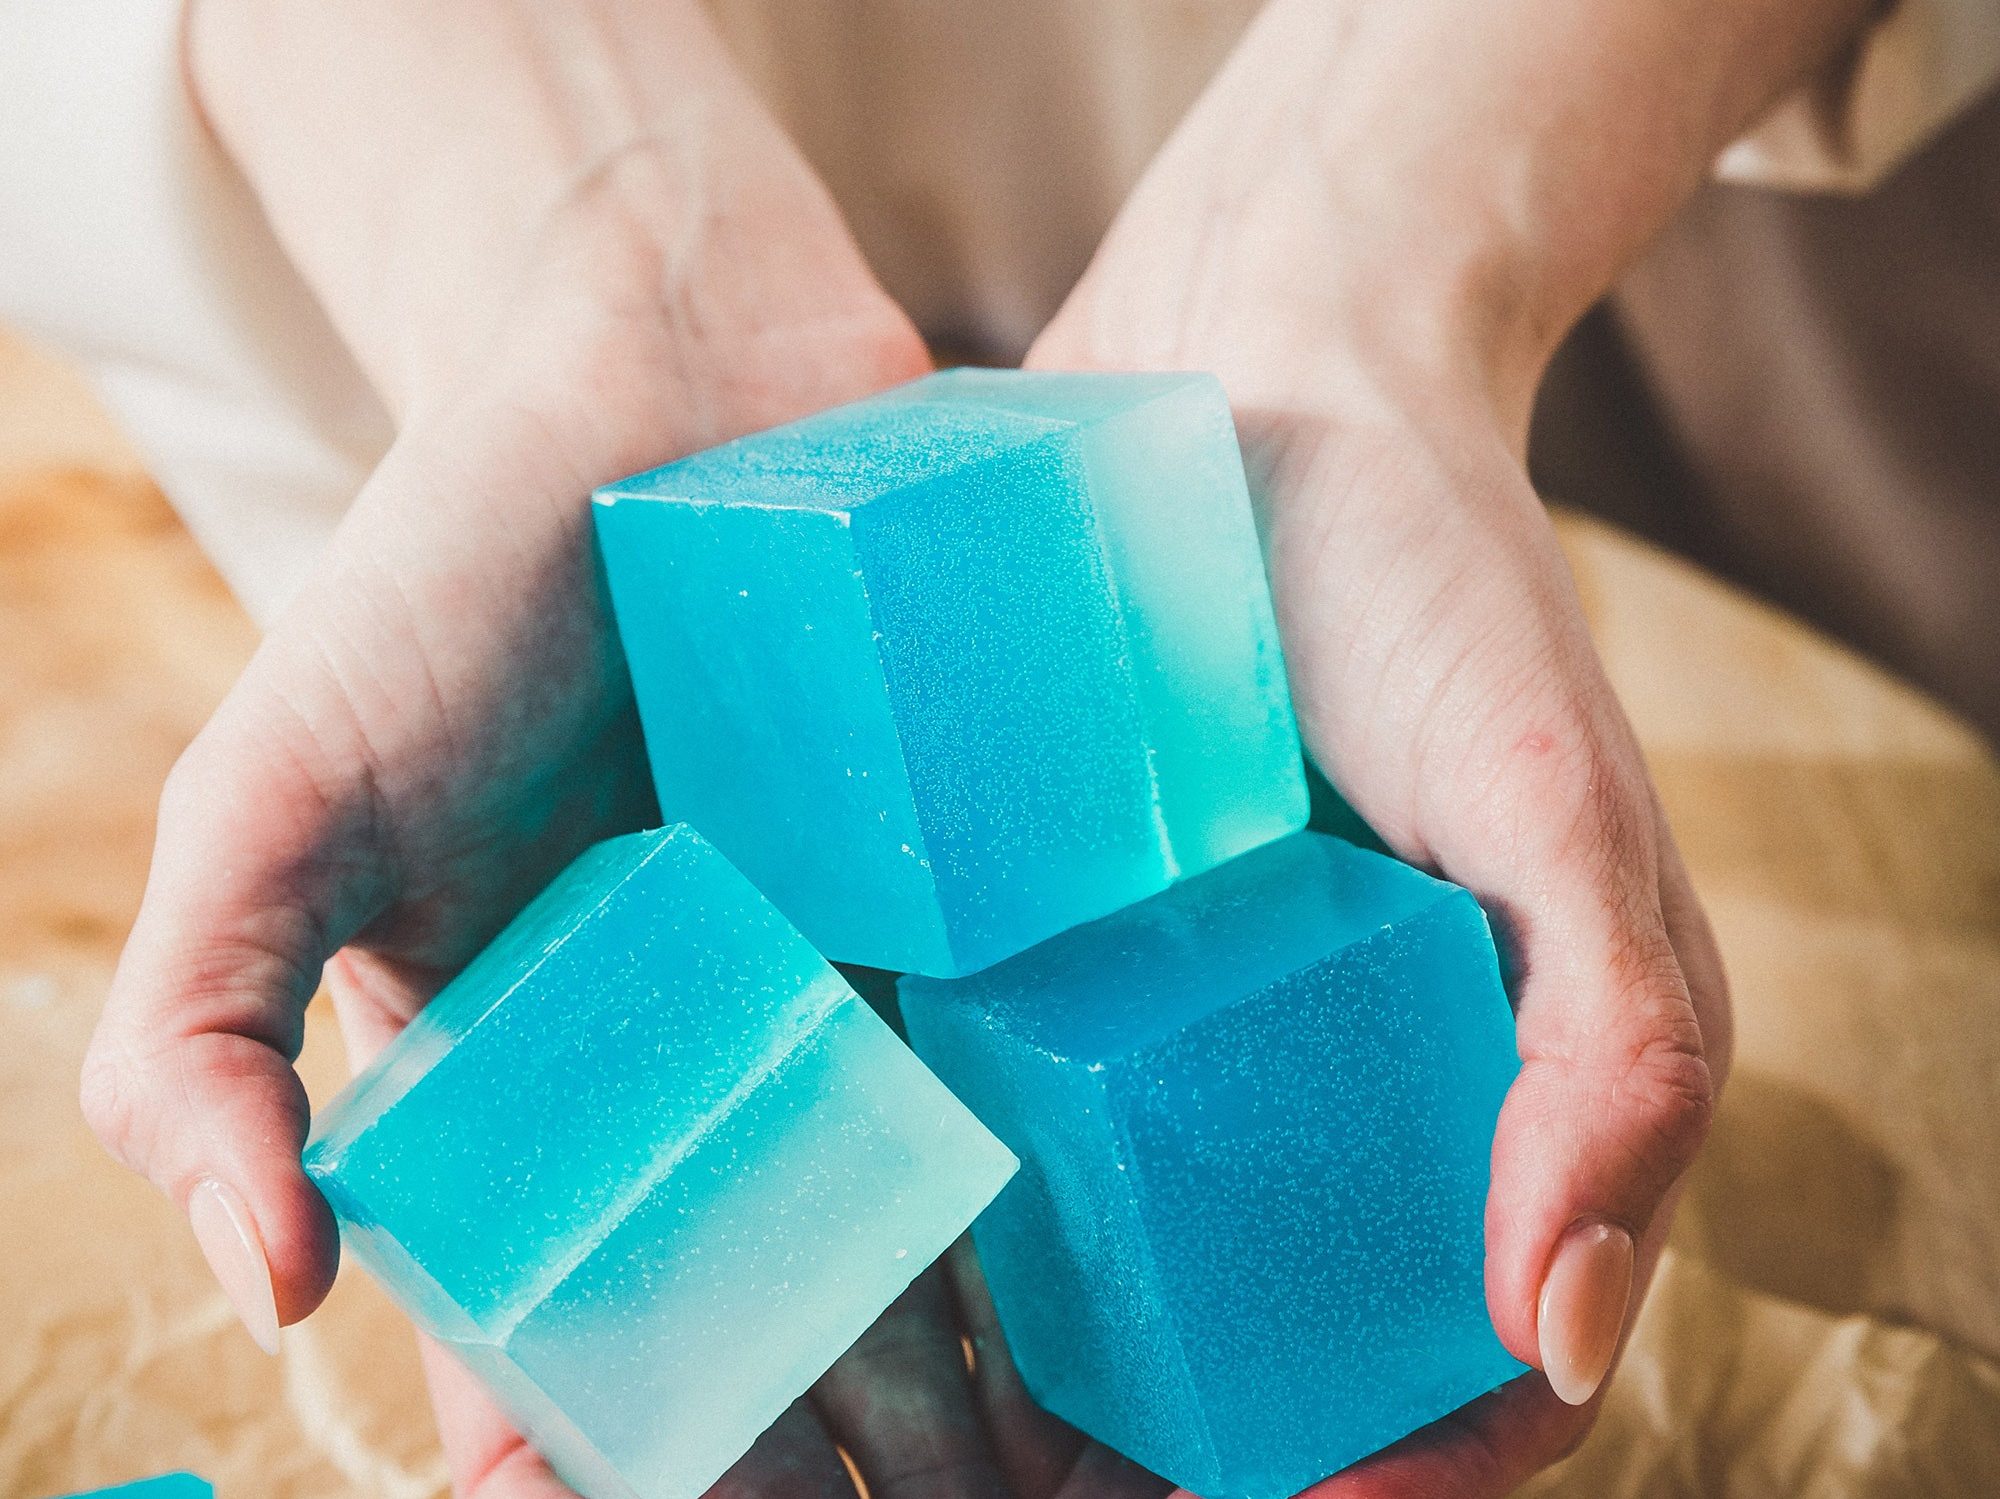 Cubes of bright blue soap being held out in someone's hands.